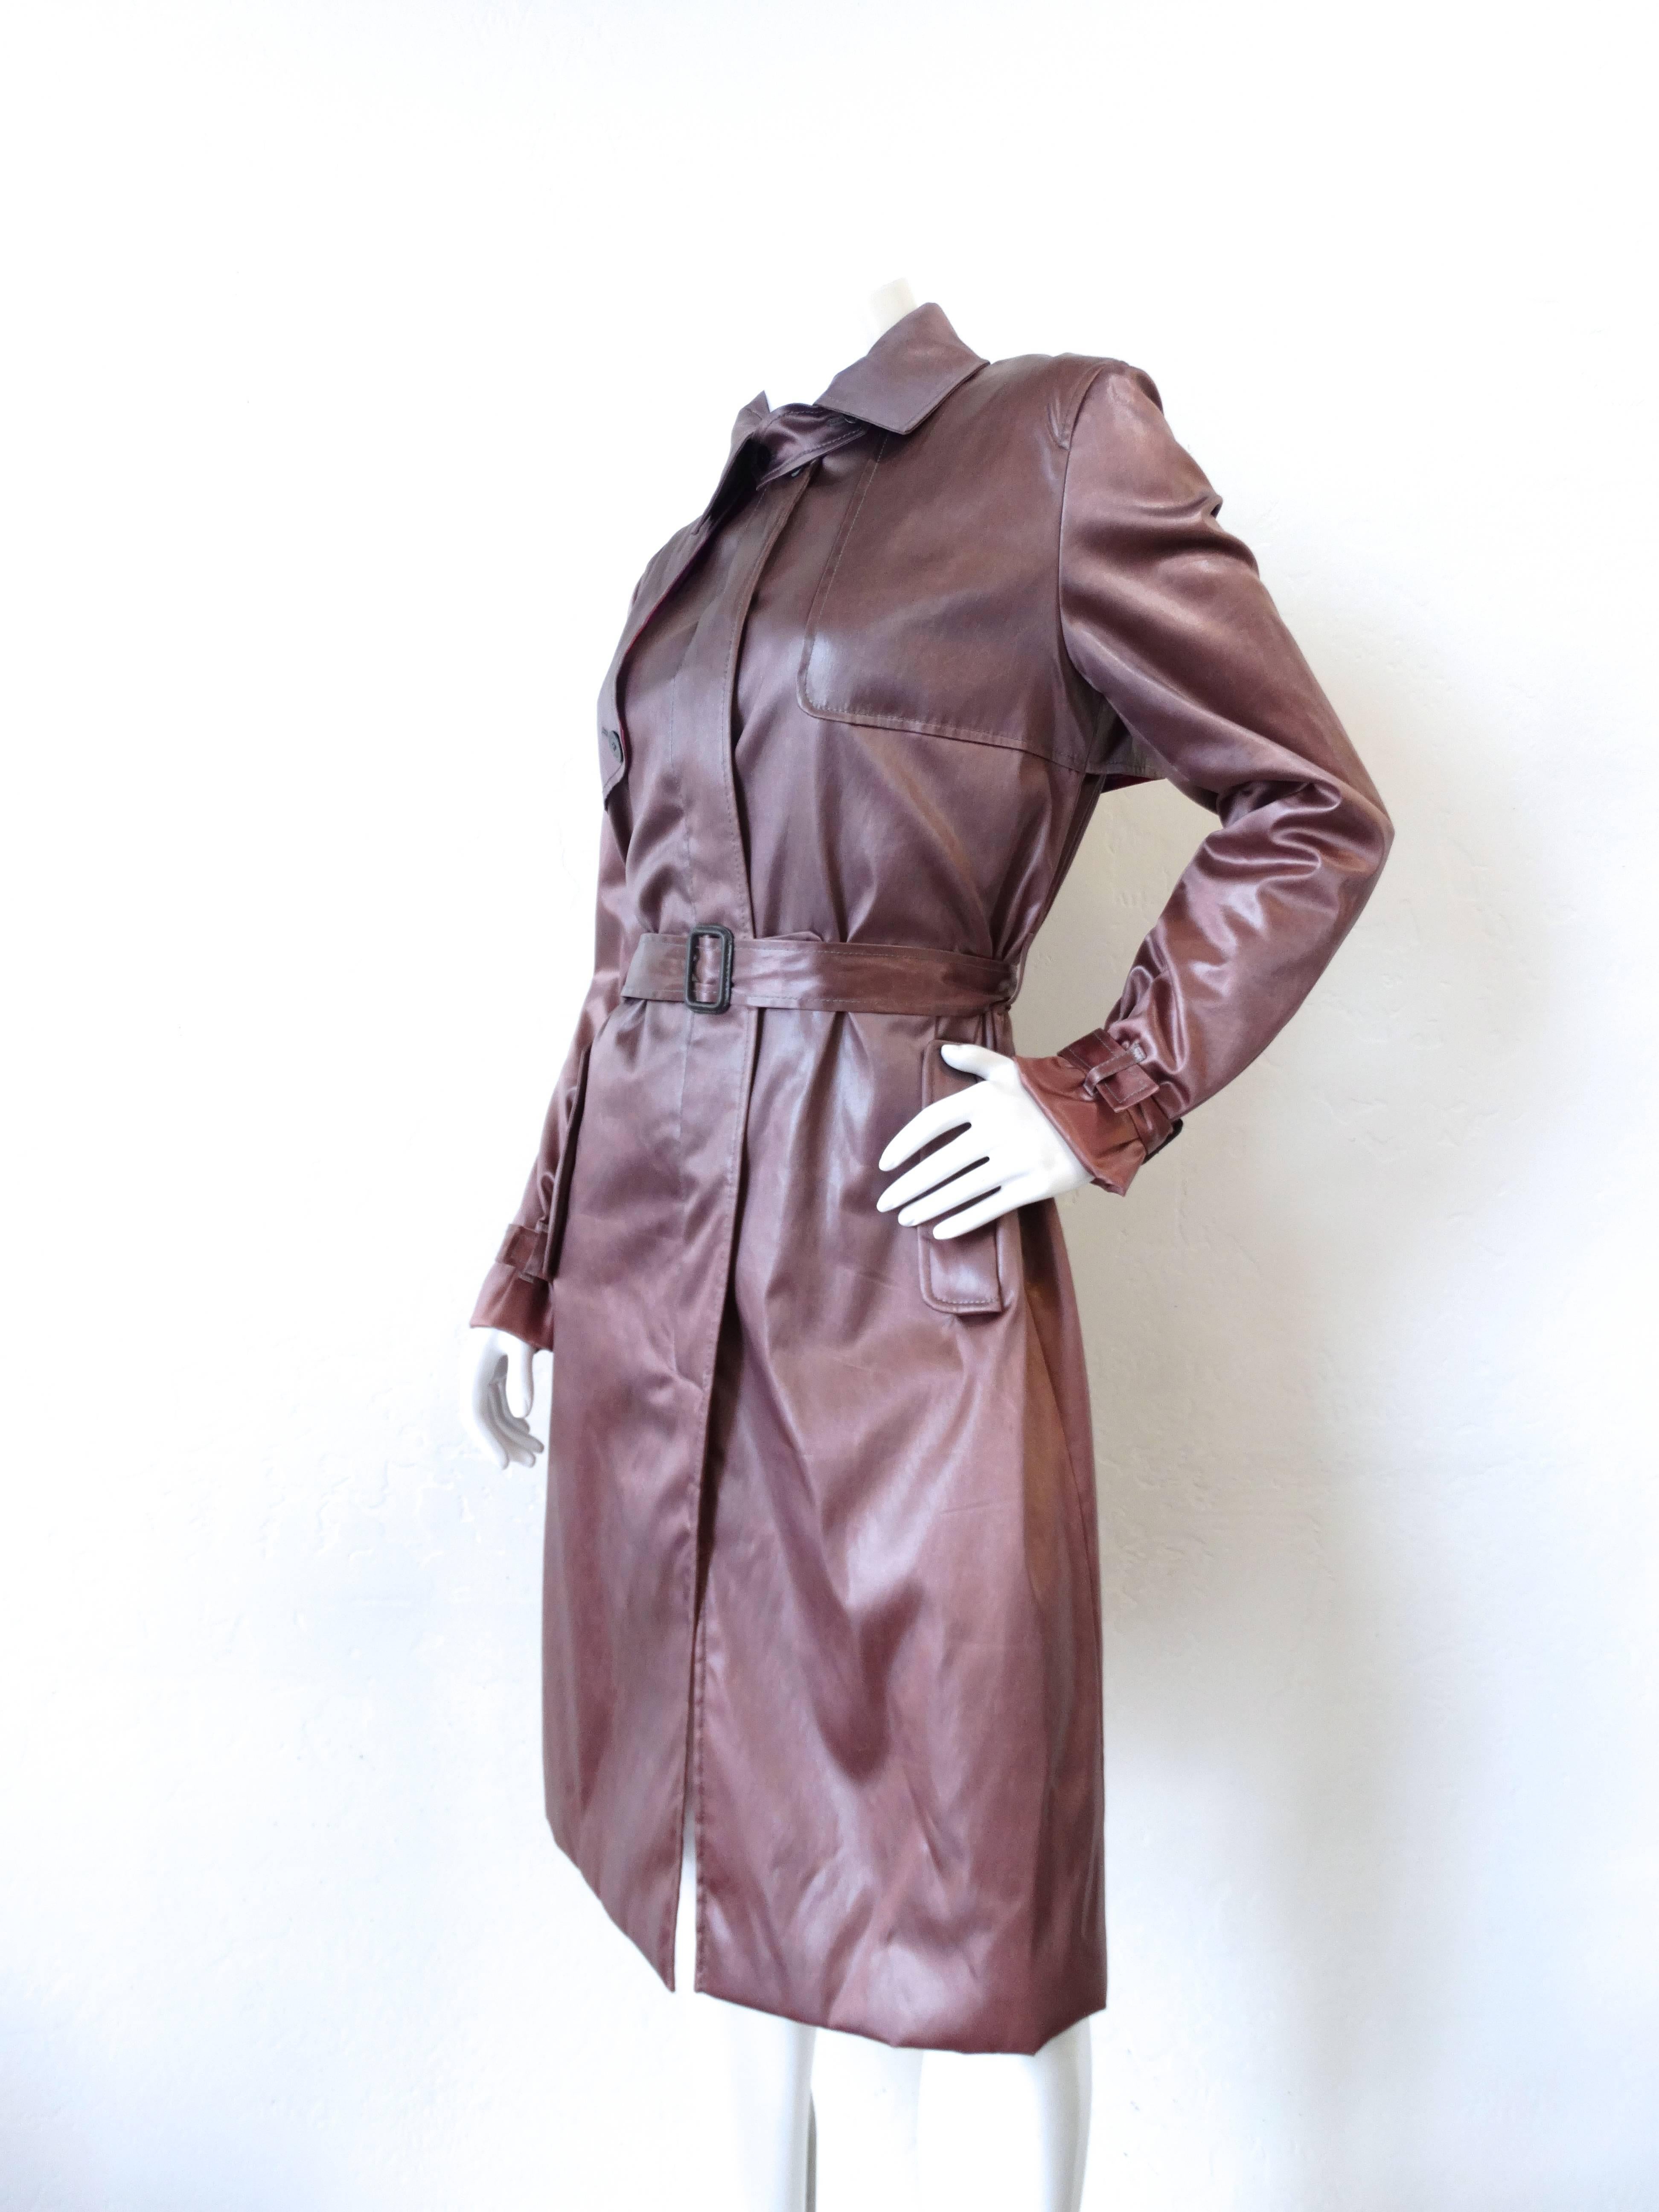 Nothing like a little bit of Pucci to liven up your outerwear collection! Super silky soft satin in this amazing dark dusty lilac color. Classic trench coat construction with a slightly cropped fit. Buttons up the front with hidden button